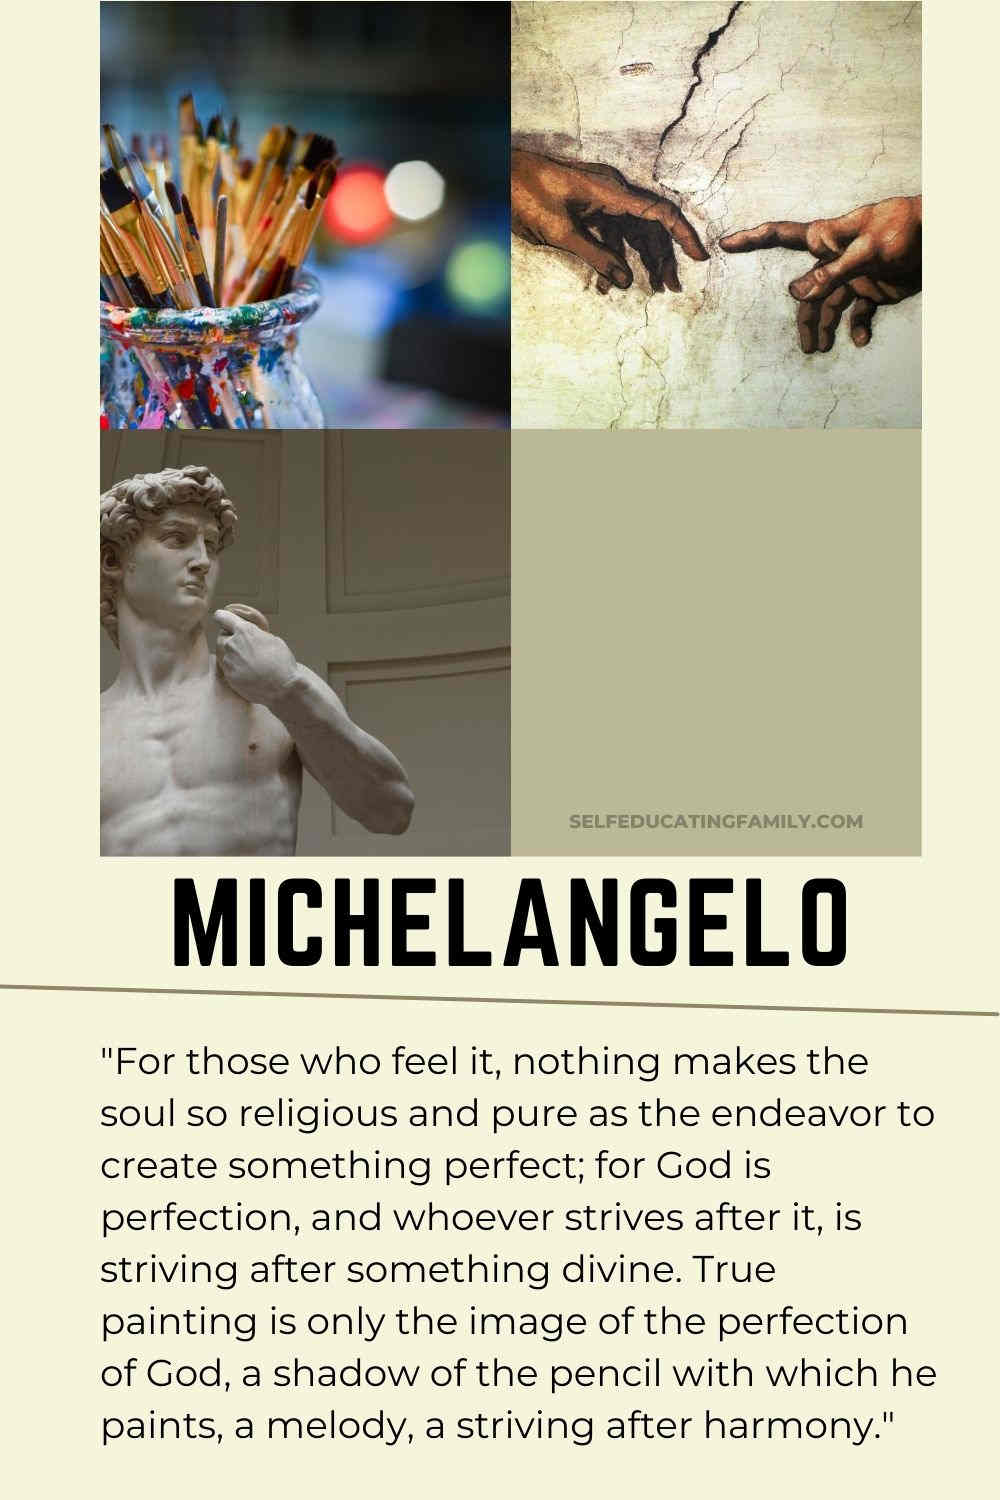 4 quadrants: Michelangelo's David, Paint brushes in a jar, the fingers touching from the Sistene Chapel, and blank pale olive color. With Michelangelo quote about creating